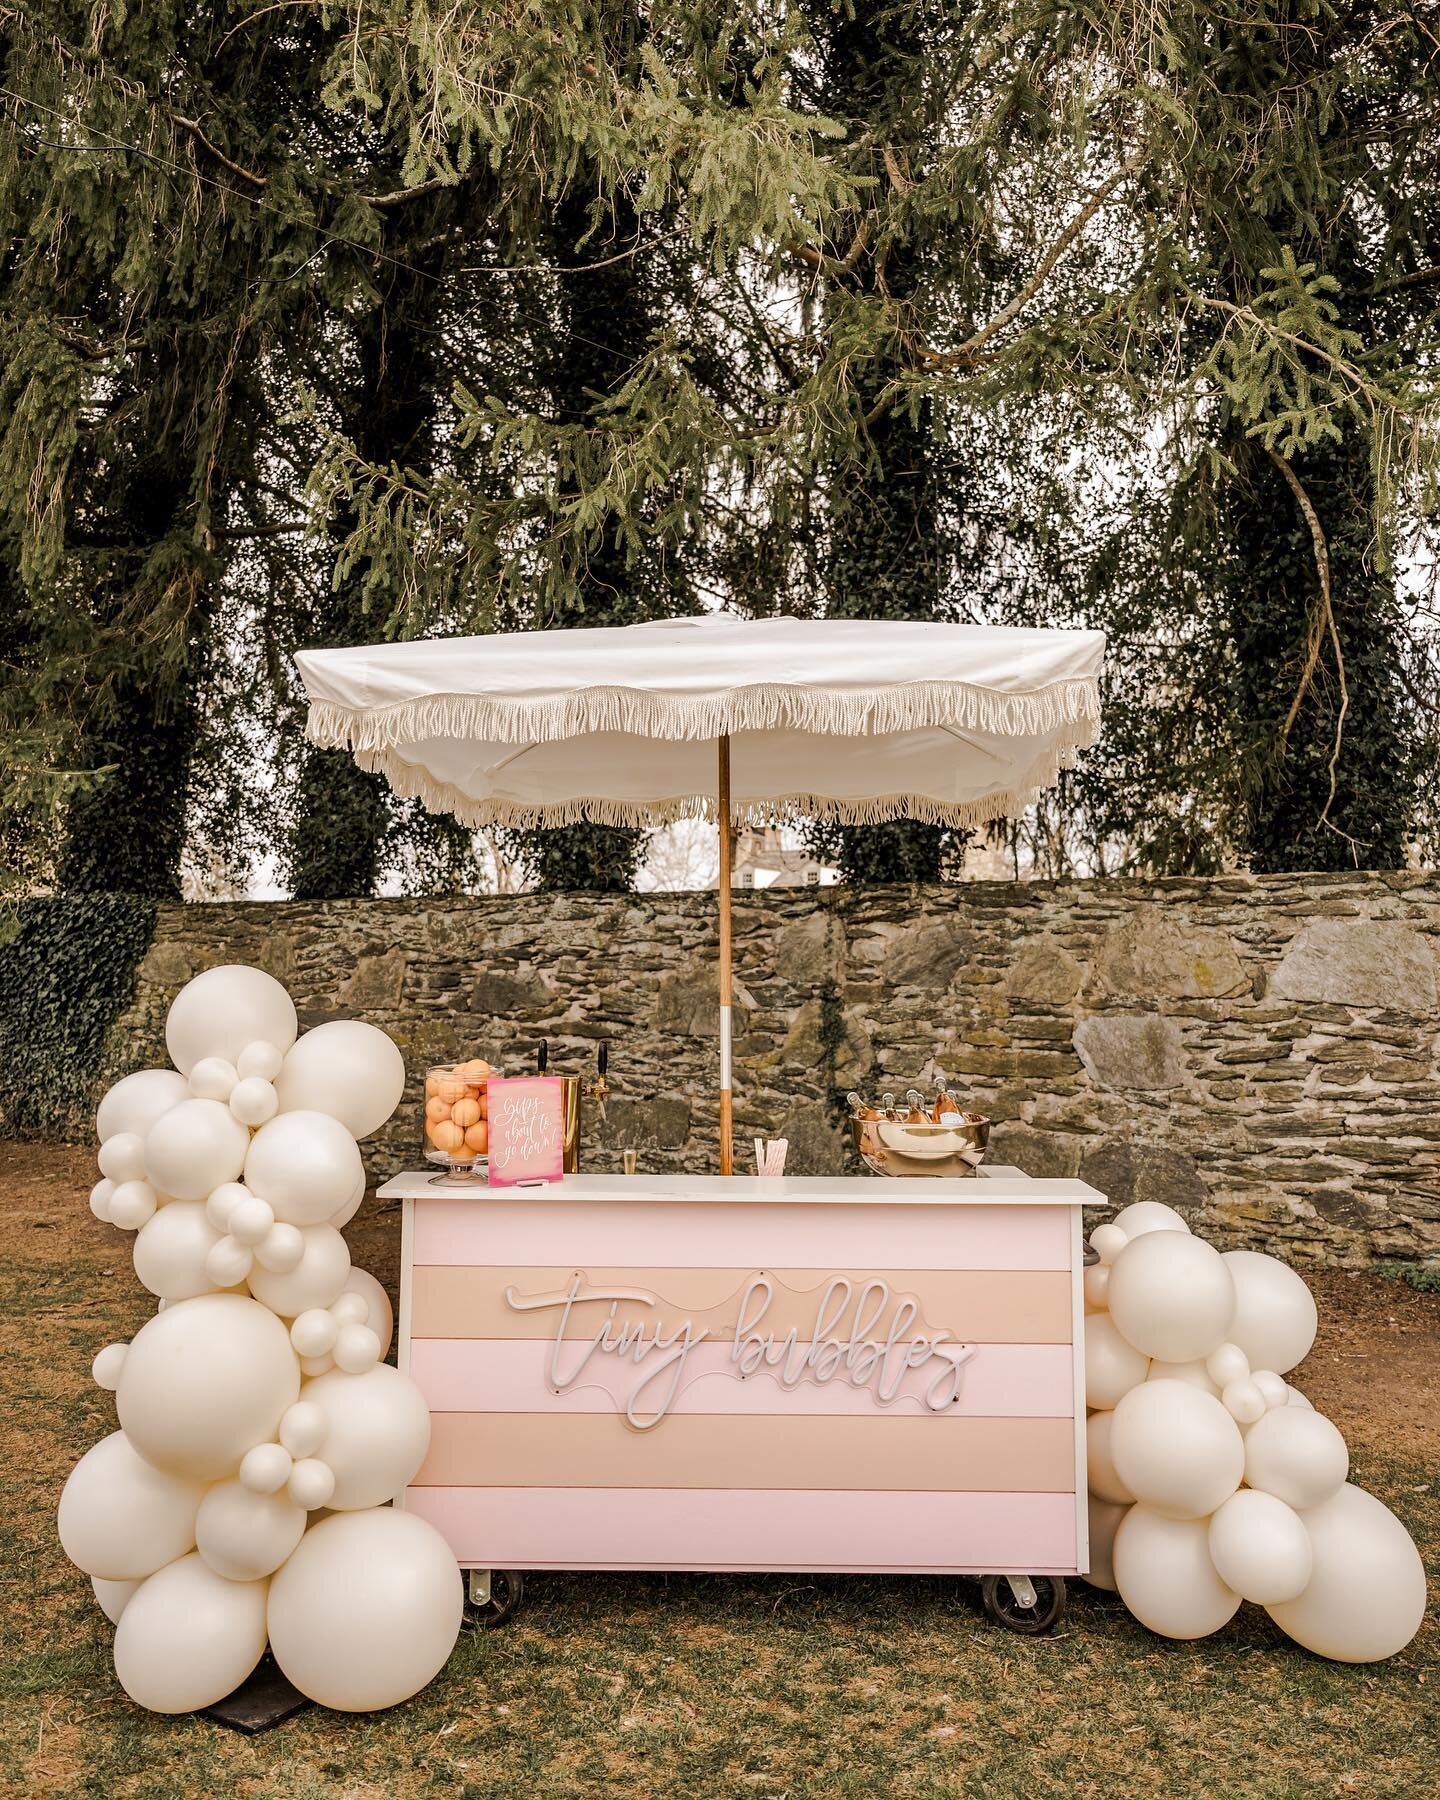 We are loving Louise with the adorable balloon garland! Thank you @sunmoonballoon 🎈🥂

&bull; VENDORS &bull;
Host/planning- Amanda Summers Photography
@asummersphoto 
Florist- Blossom &amp; Basket Boutique 
@blossomandbasketboutique 
Arches/rentals-